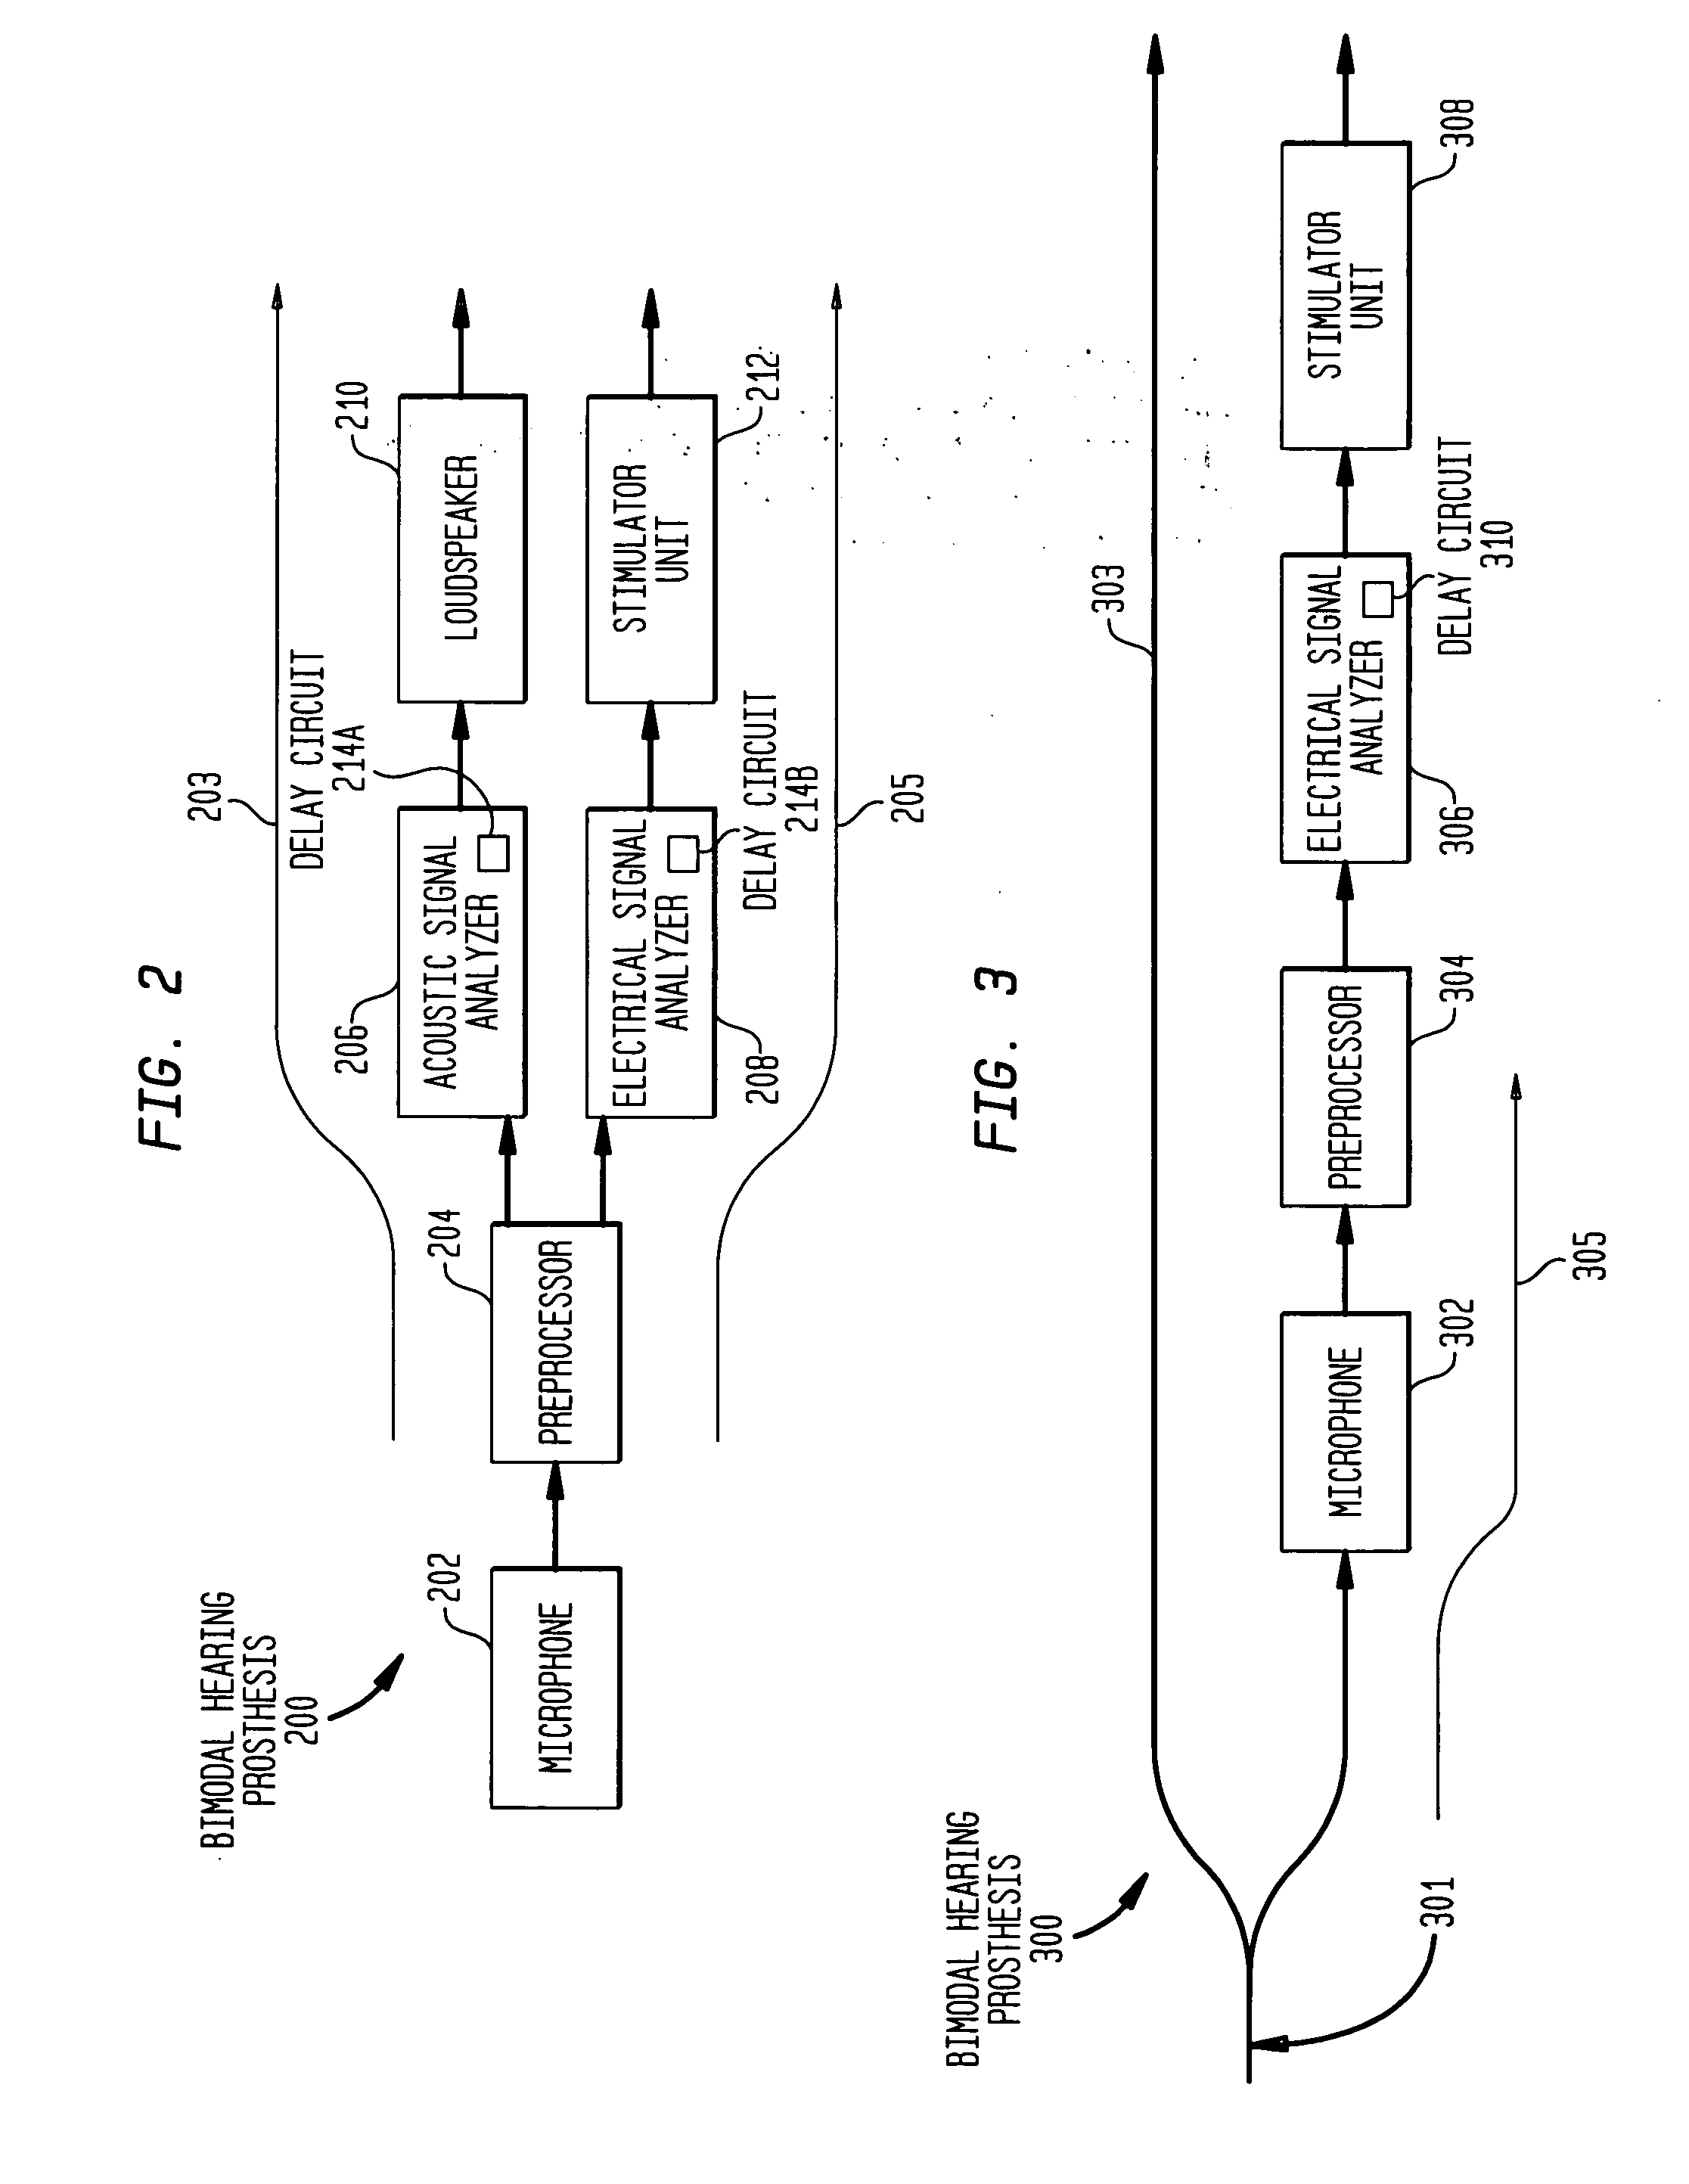 Simultaneous delivery of electrical and acoustical stimulation in a hearing prosthesis